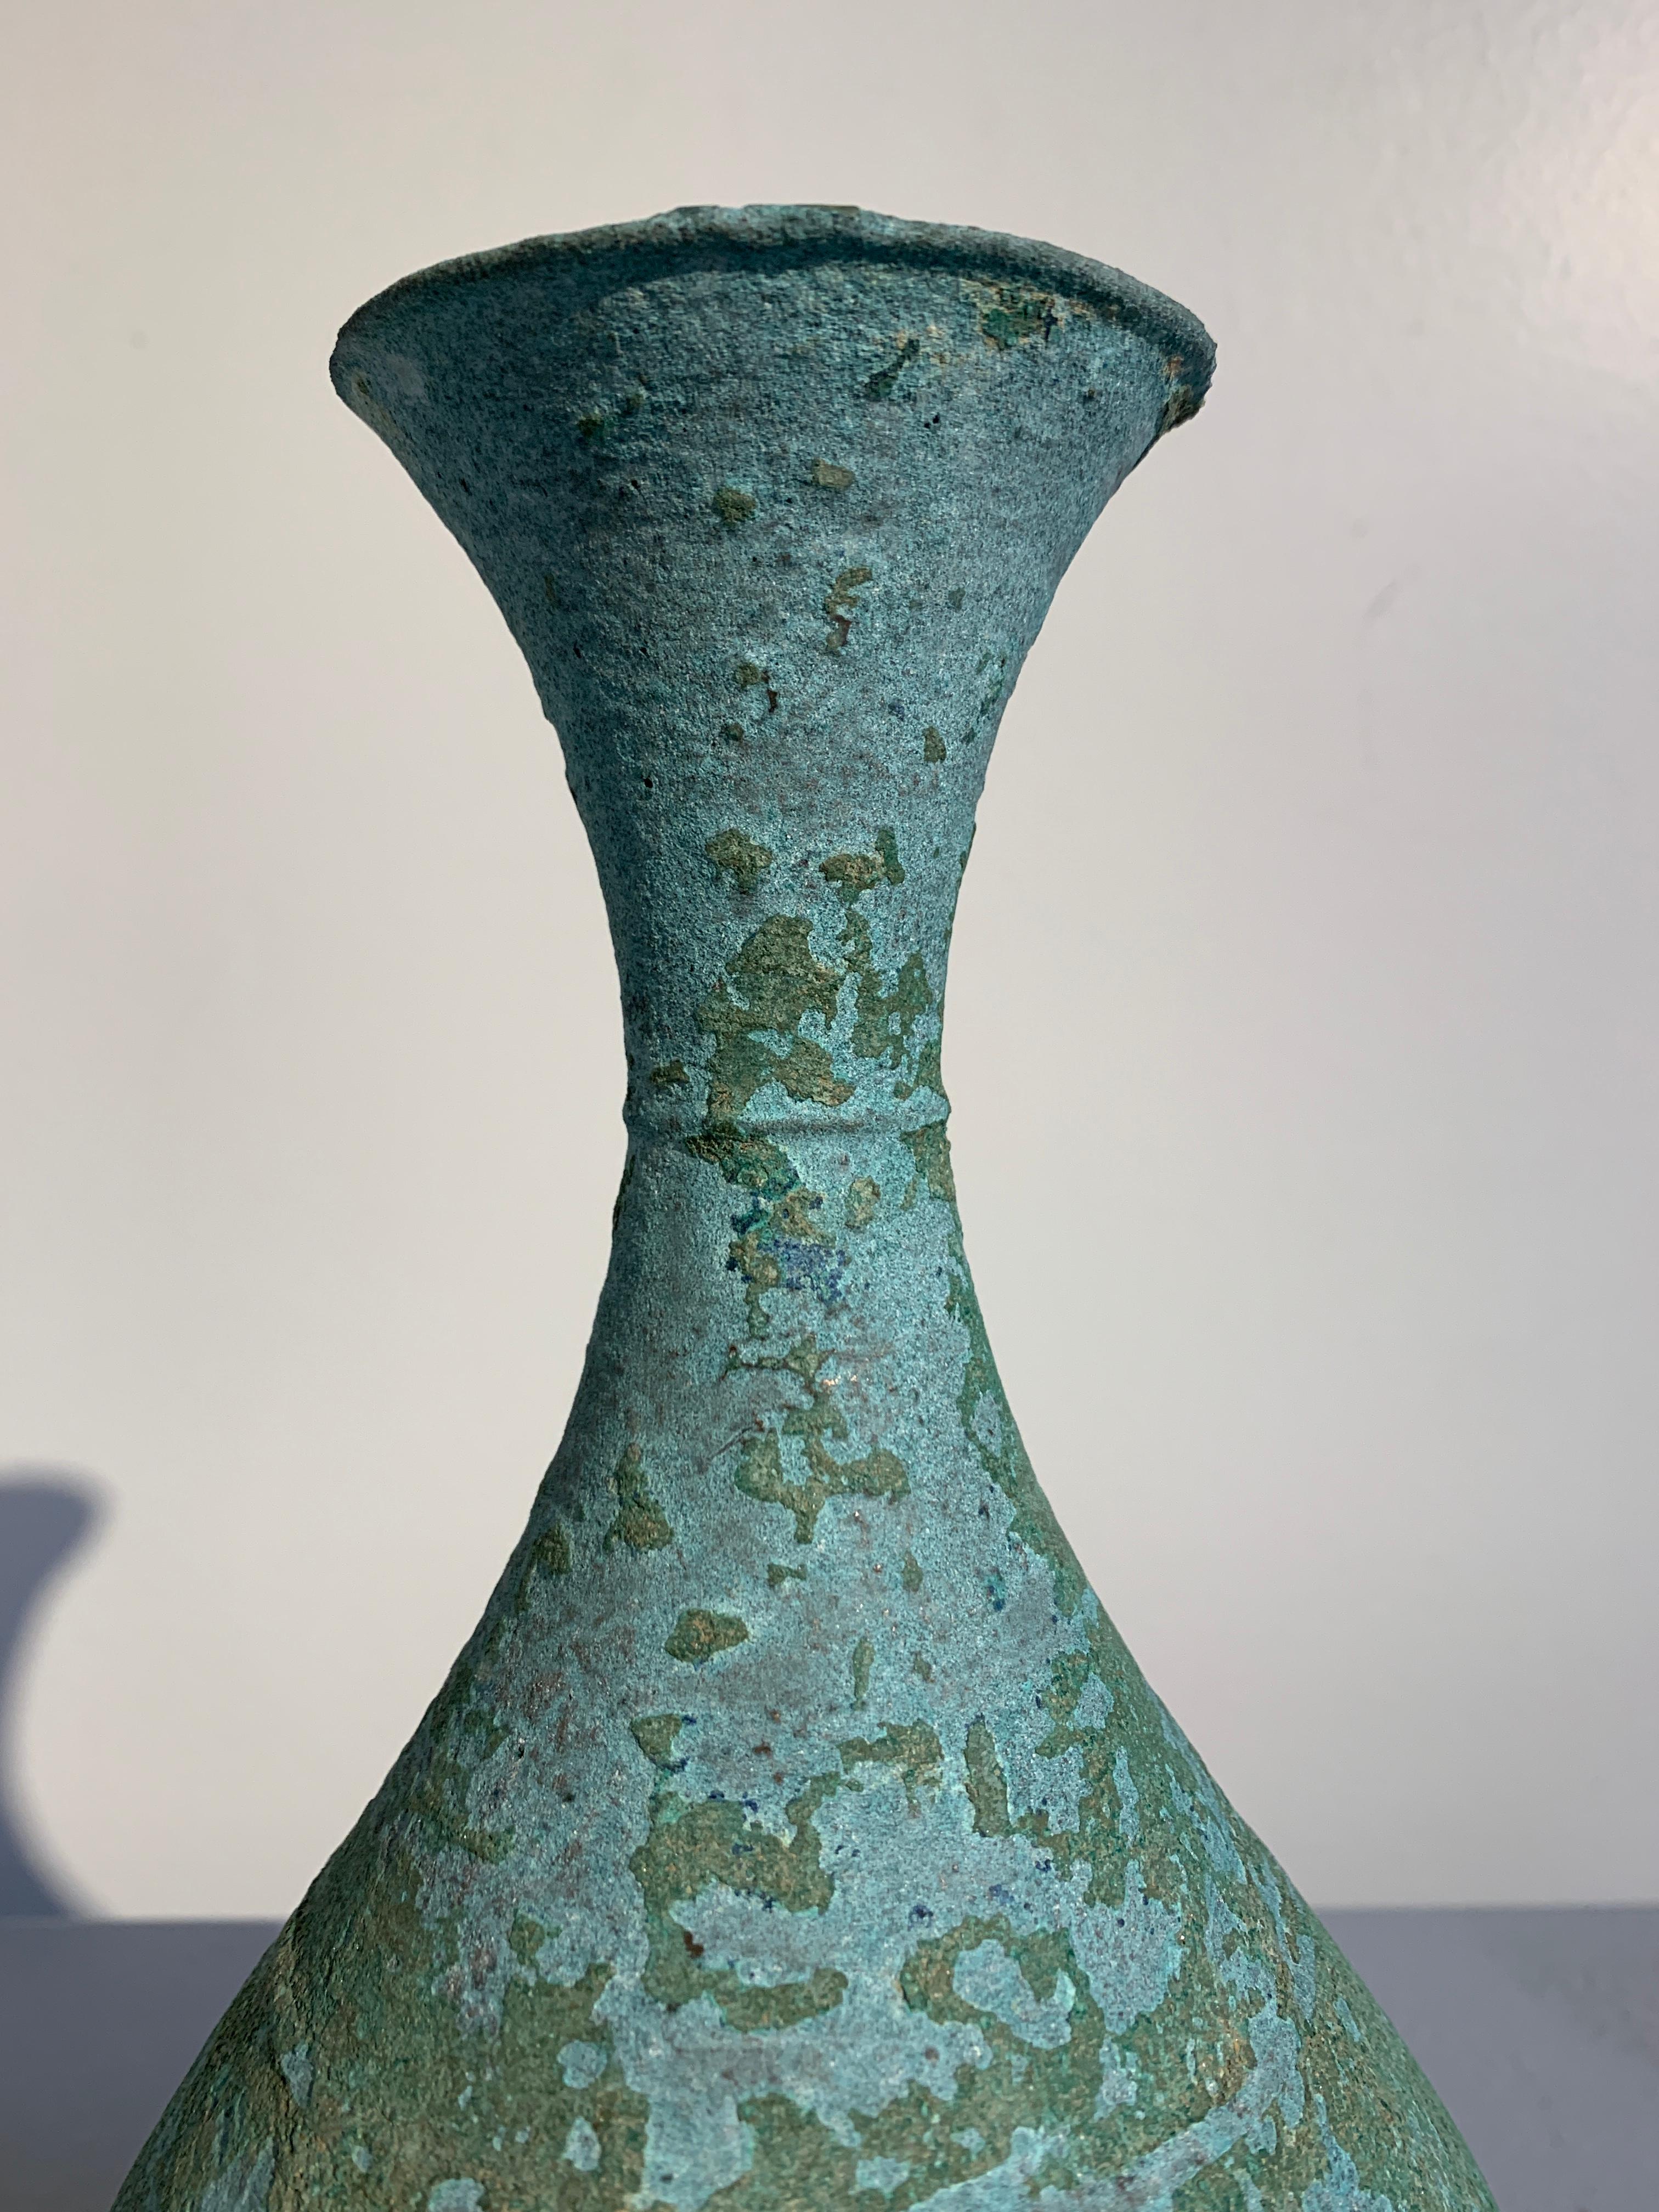 18th Century and Earlier Korean Bronze Vase with Blue Green Patina, Goryeo Dynasty, 13th Century